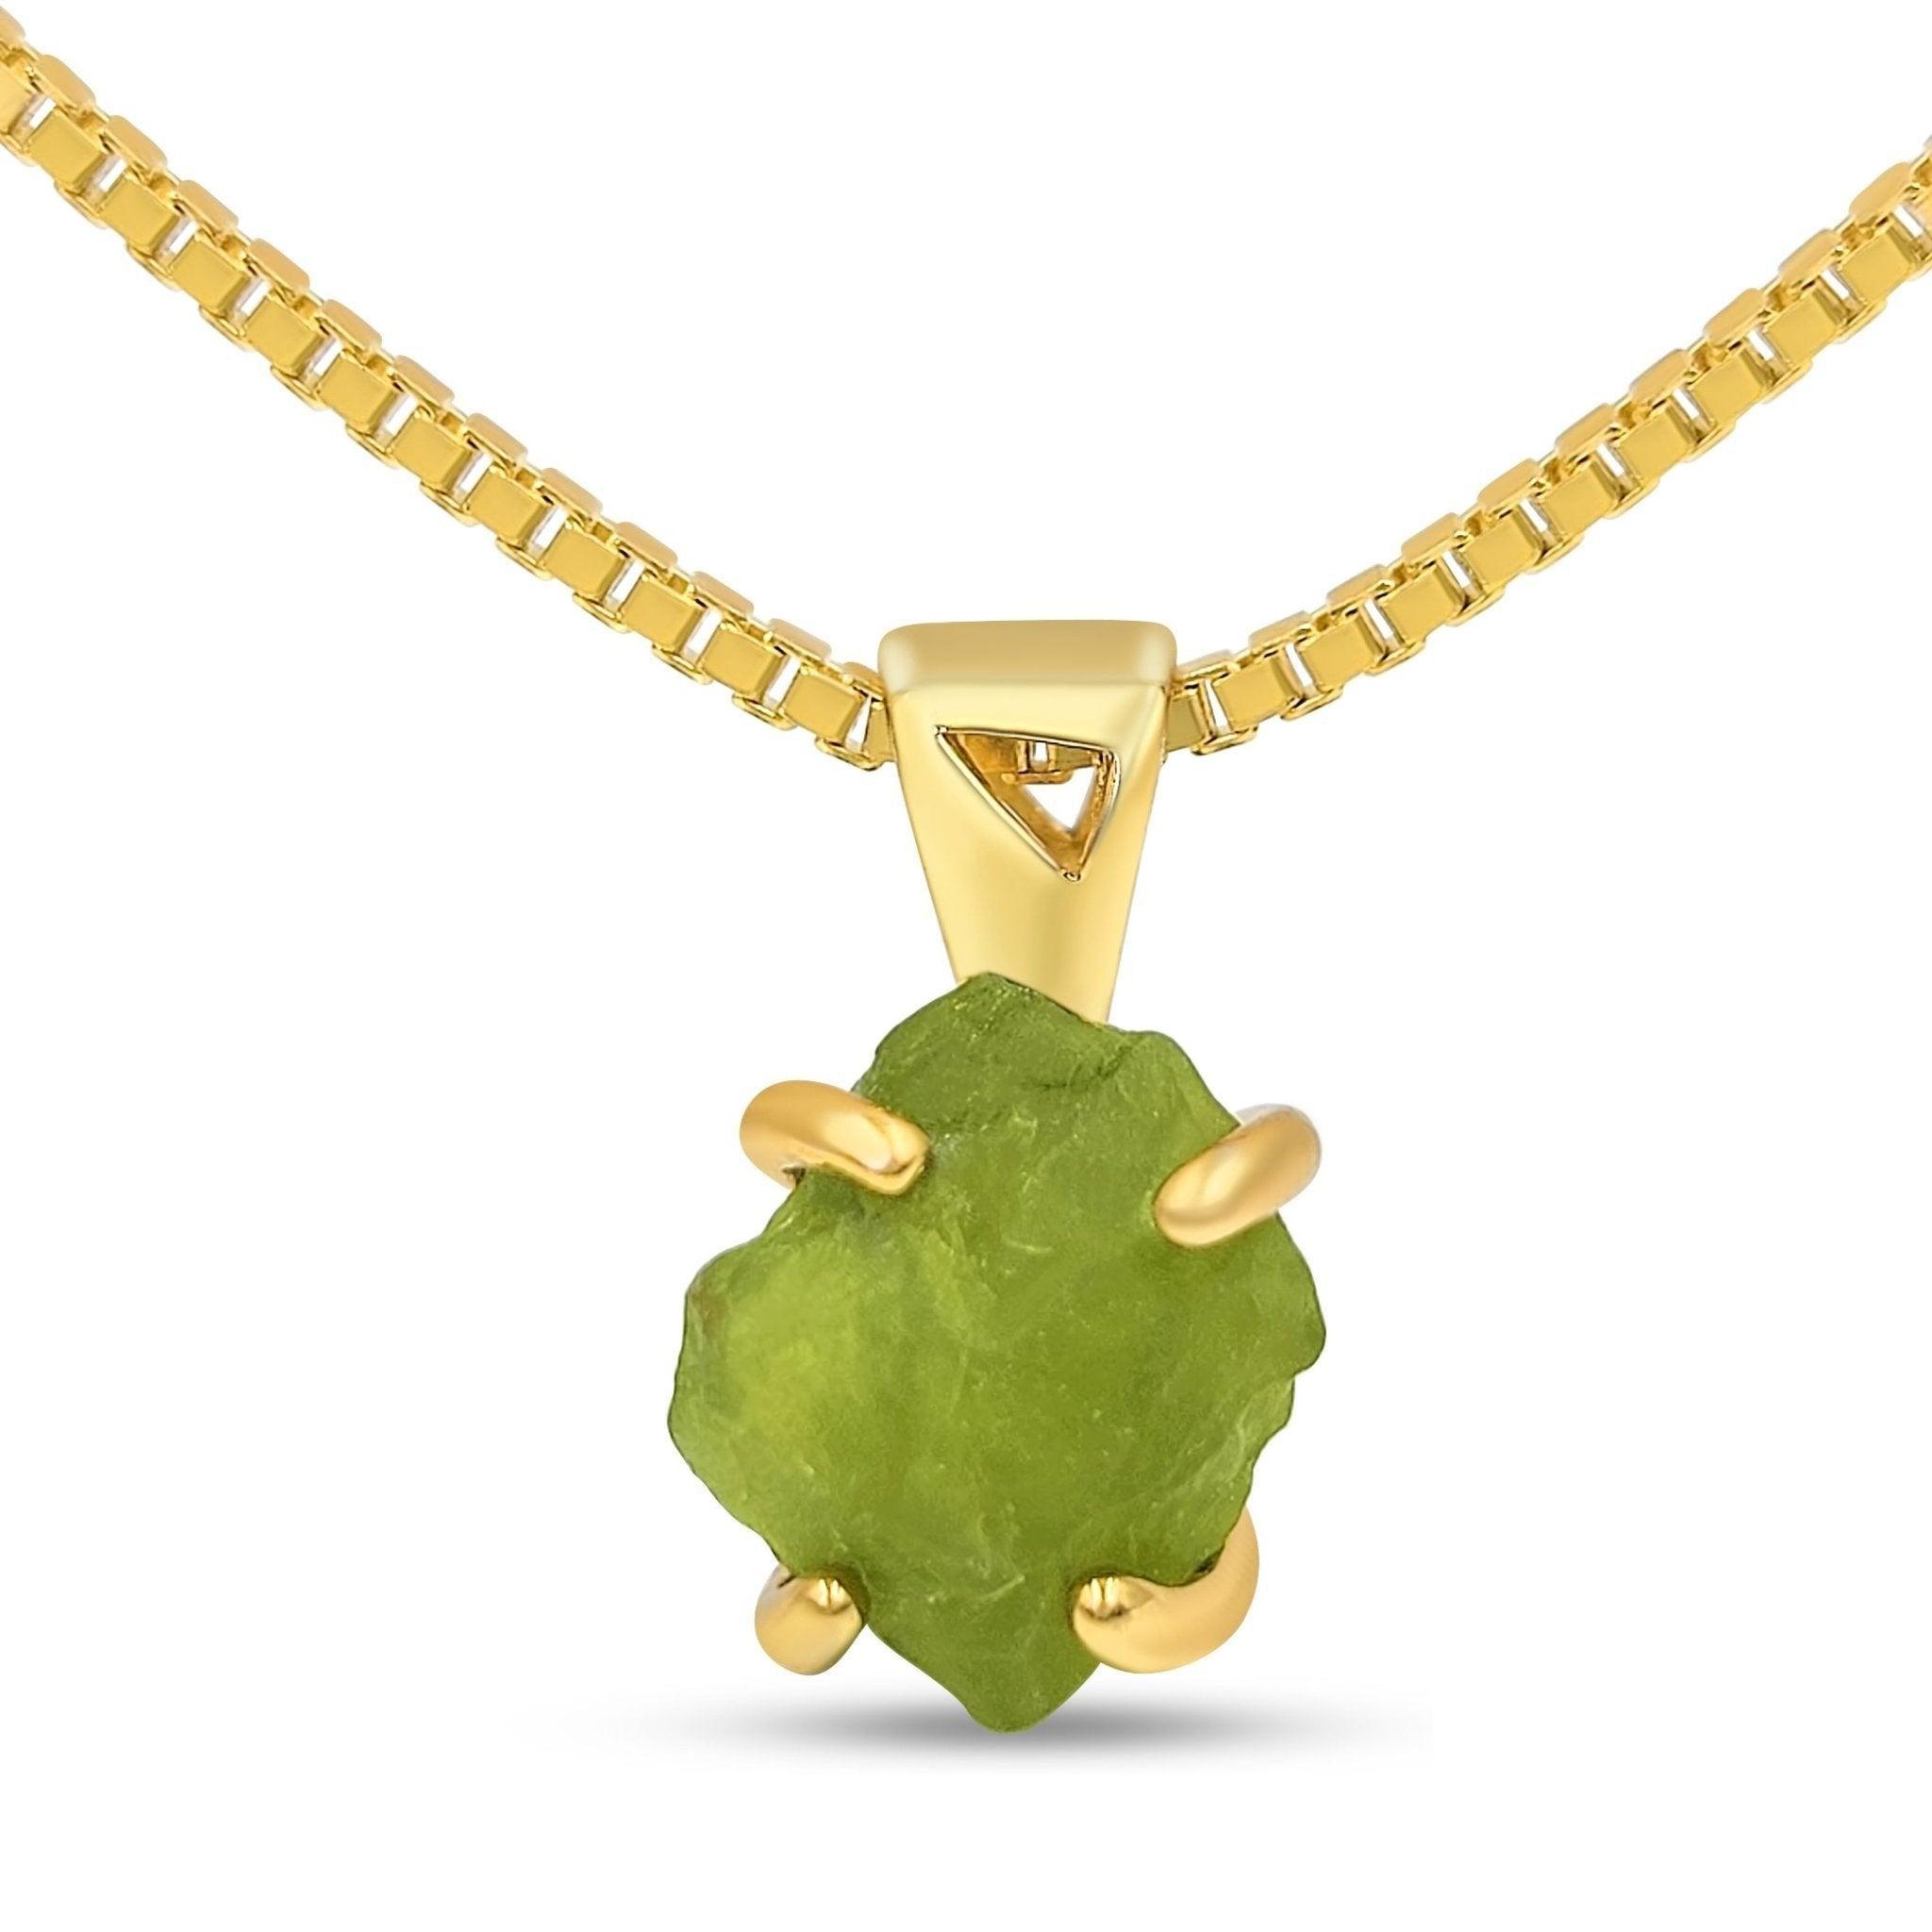 Designs by Nature Gems Raw Peridot Necklace, August Birthstone Jewelry,  With 24 Inch White Gold Plated Brass Chain, Genuine Raw Crystal, Handmade  in Canada : Amazon.ca: Handmade Products